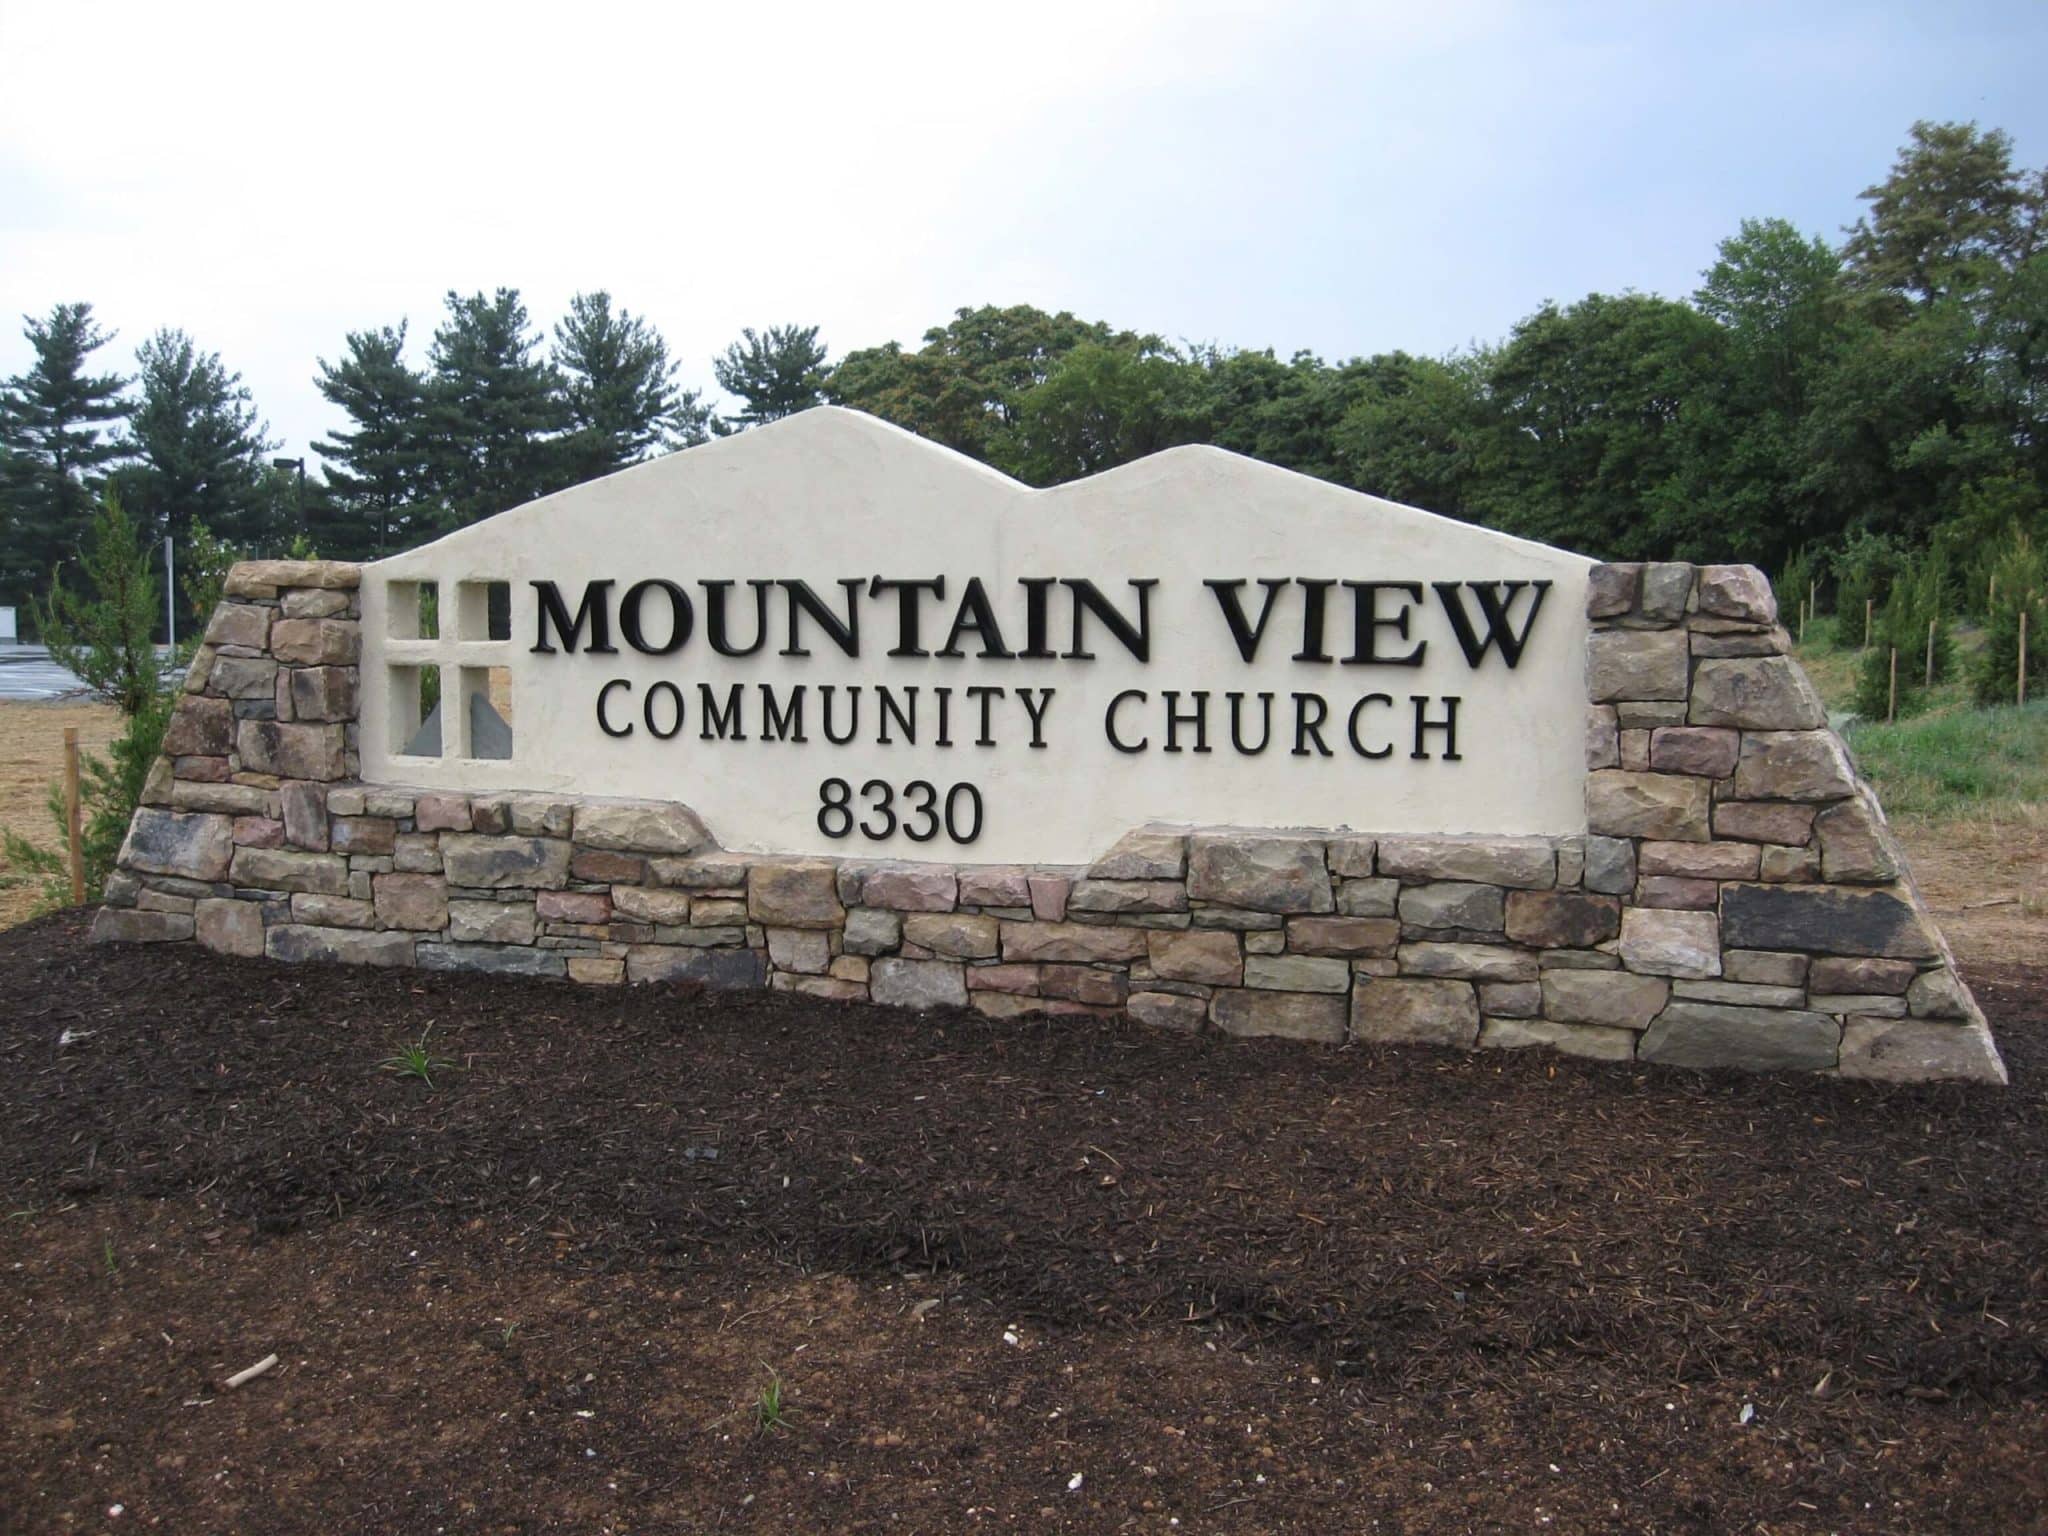 98 Mountain View Community Church, Frederick MD